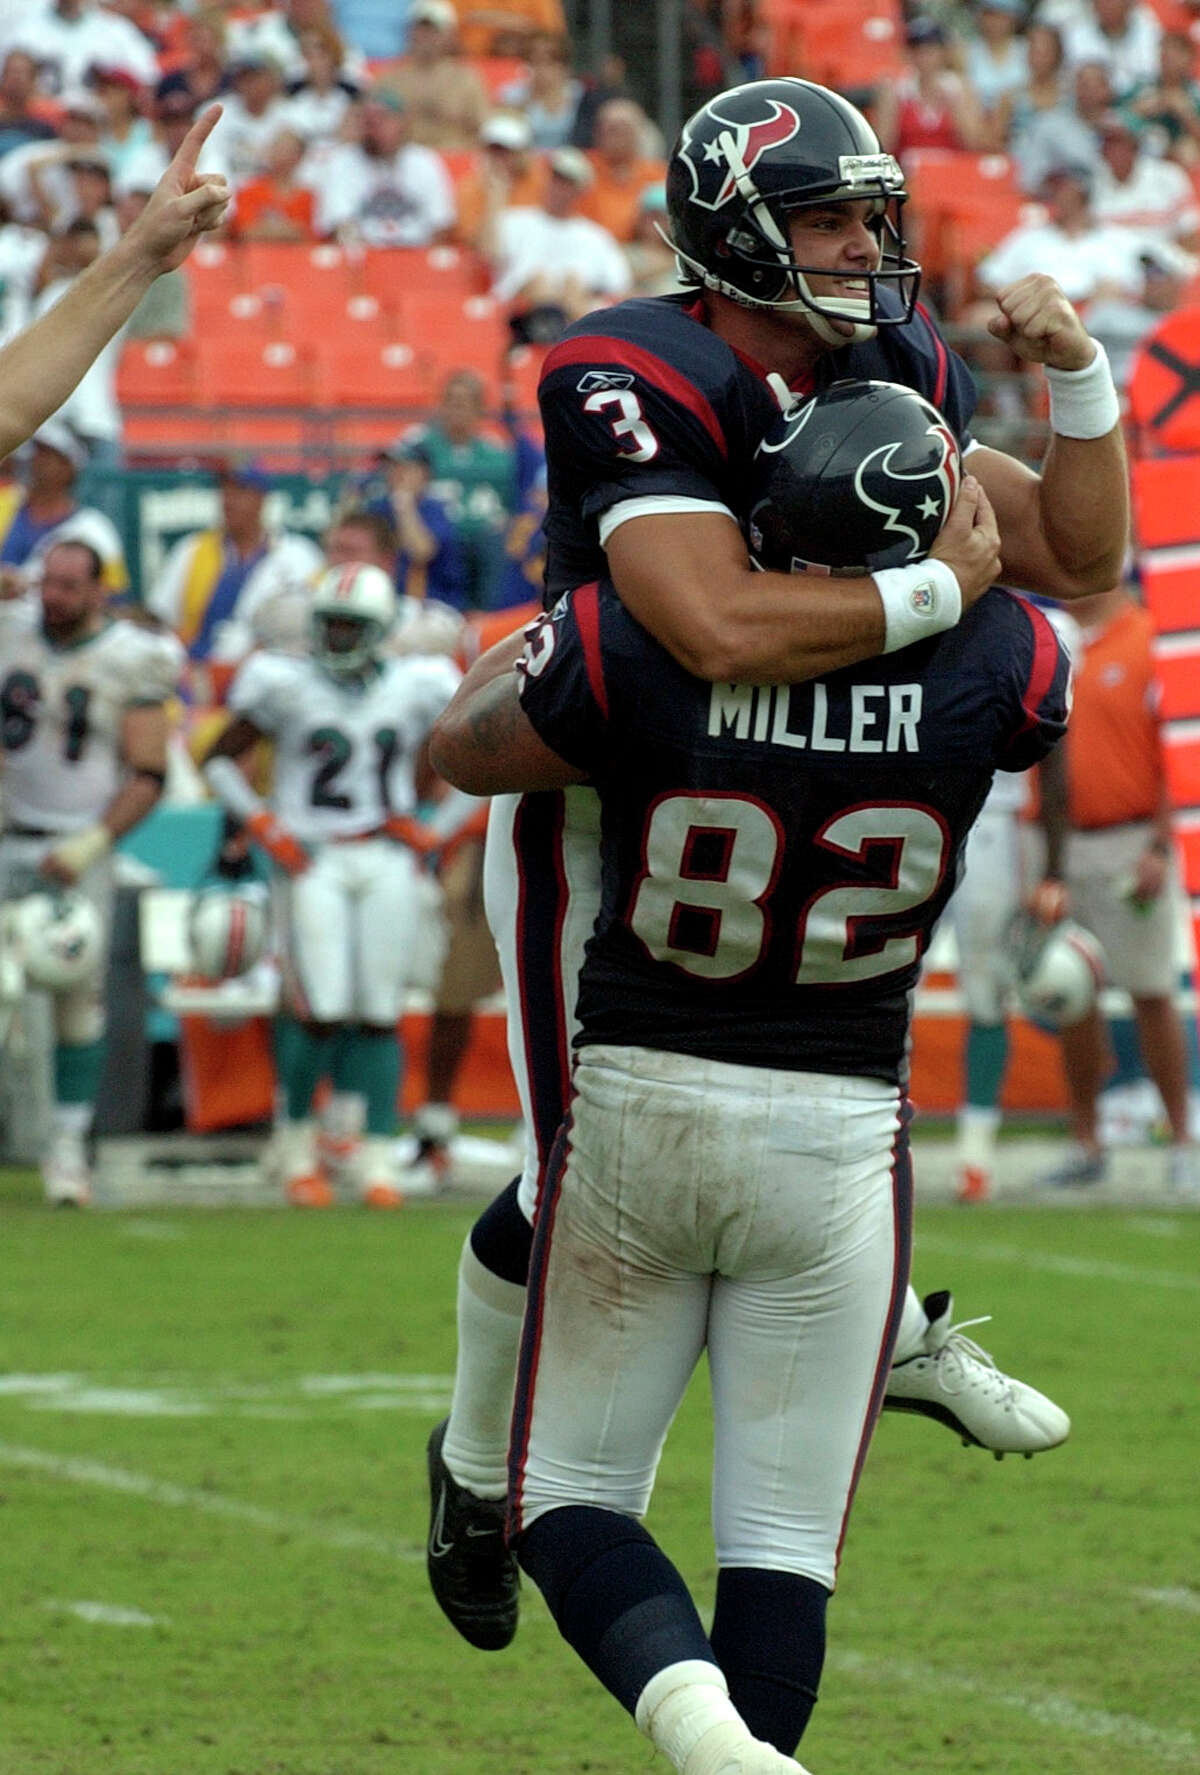 Sept. 7, 2003: Texans 21, Dolphins 20 The Texans pulled off another upset in their second season opener, beating the Dolphins on Kris Brown’s 35-yard field goal with 25 seconds left.